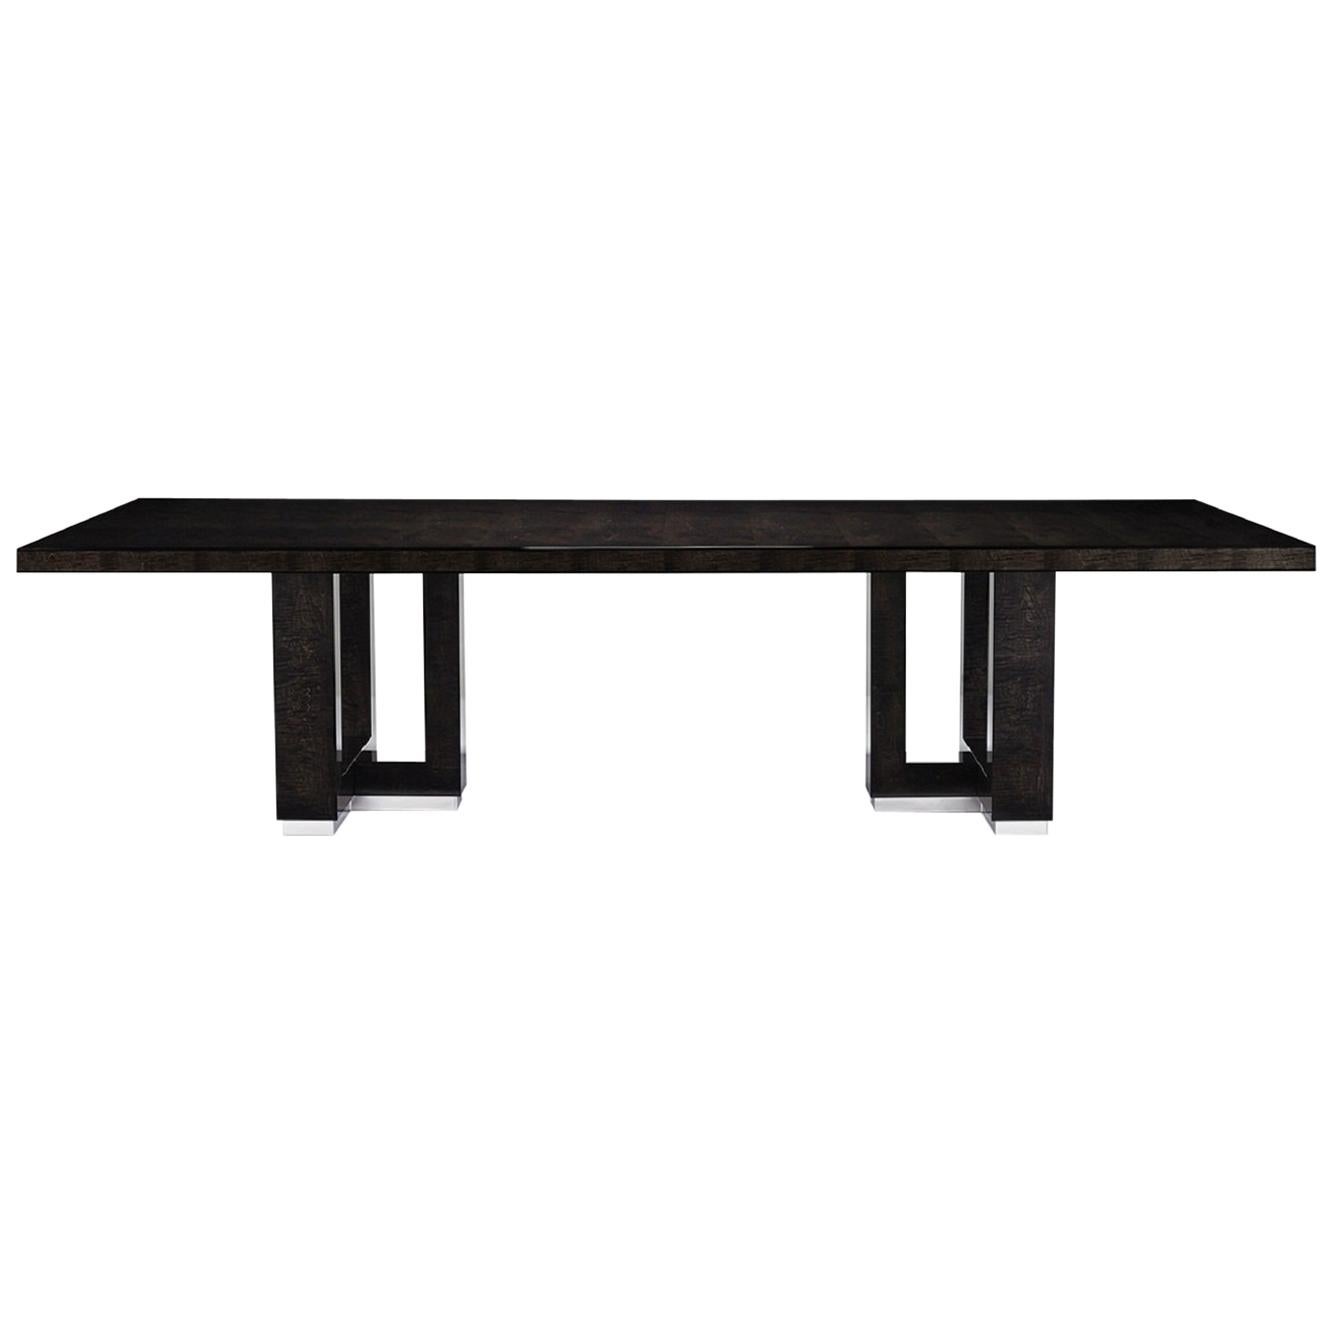 Davidson's Modern, Rectangular Hamilton Dining Table in a Sycamore Black Wood